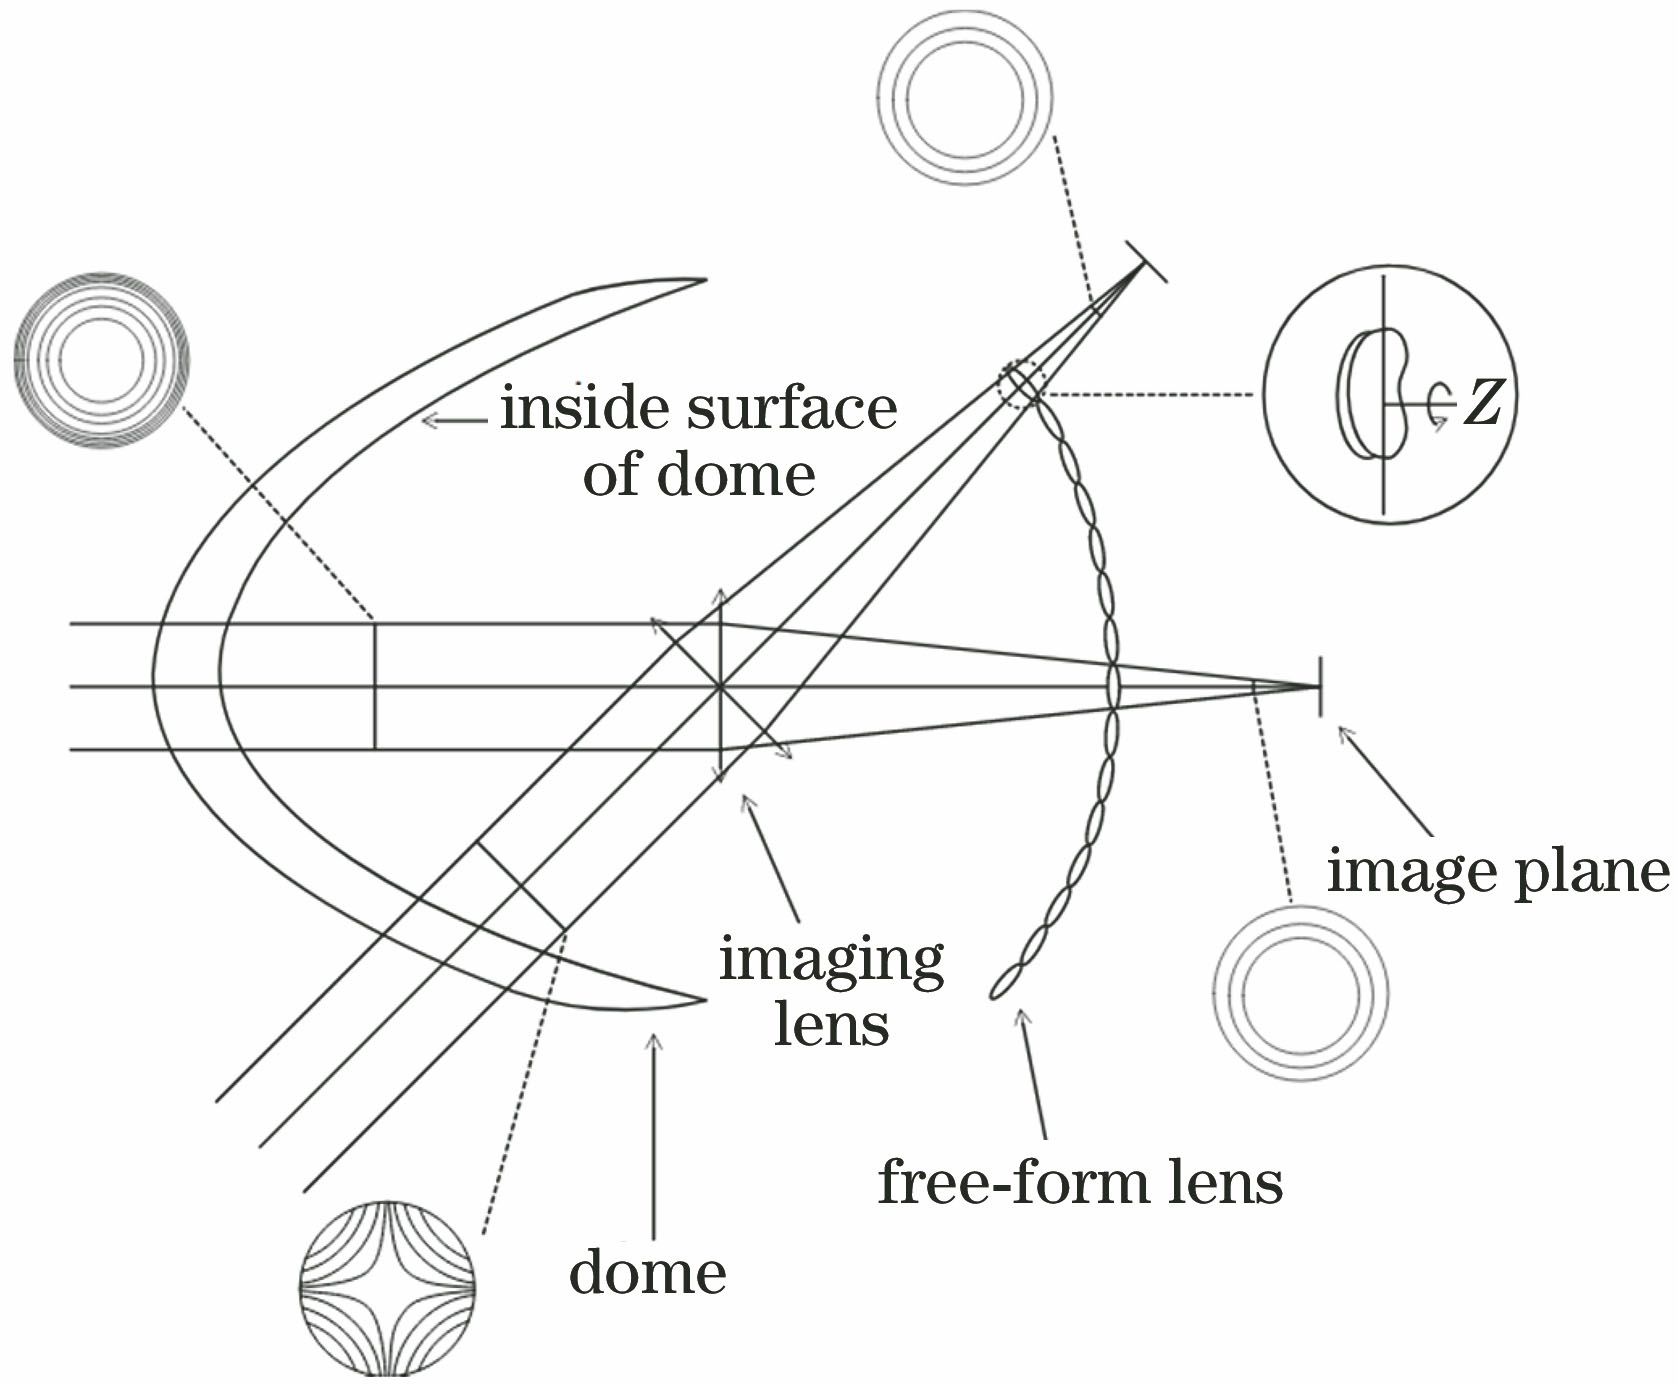 Schematic diagram of the conformal dome aberration correction based on free-form lens array